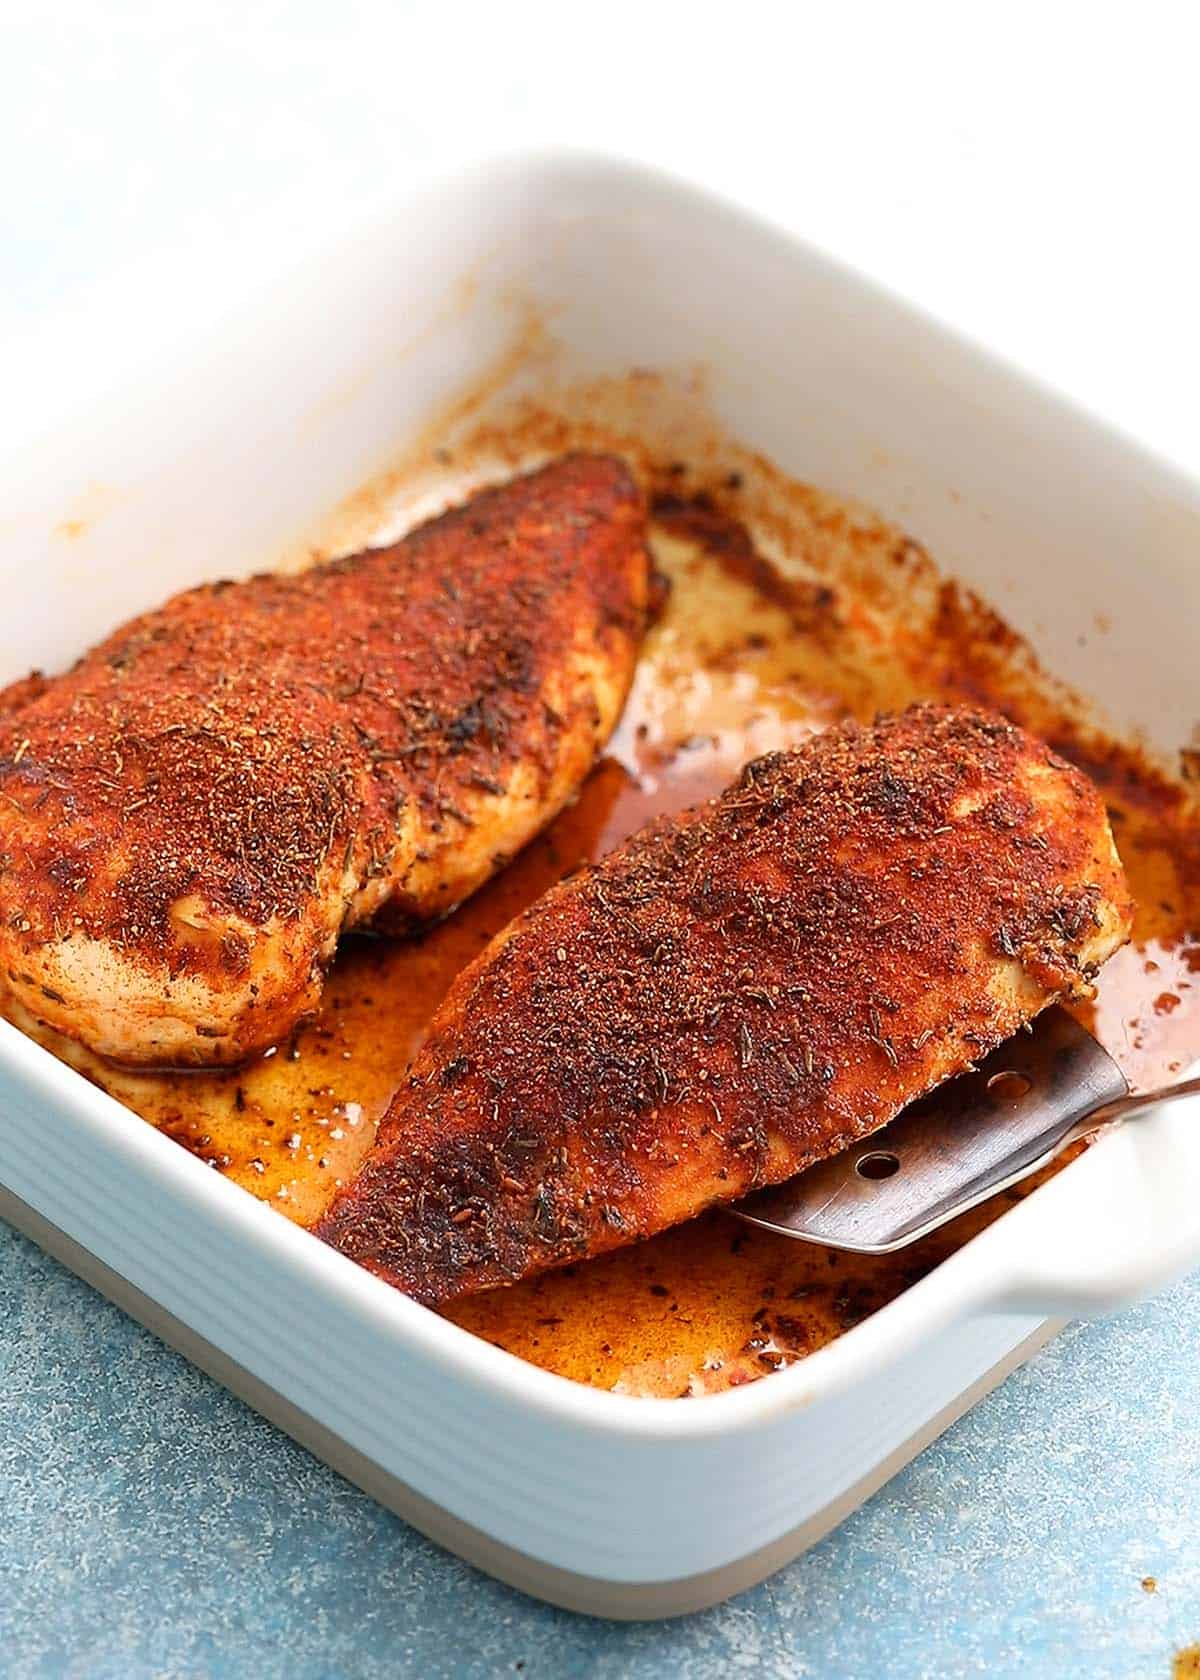 2 cooked chicken breasts on a white ceramic baking dish.